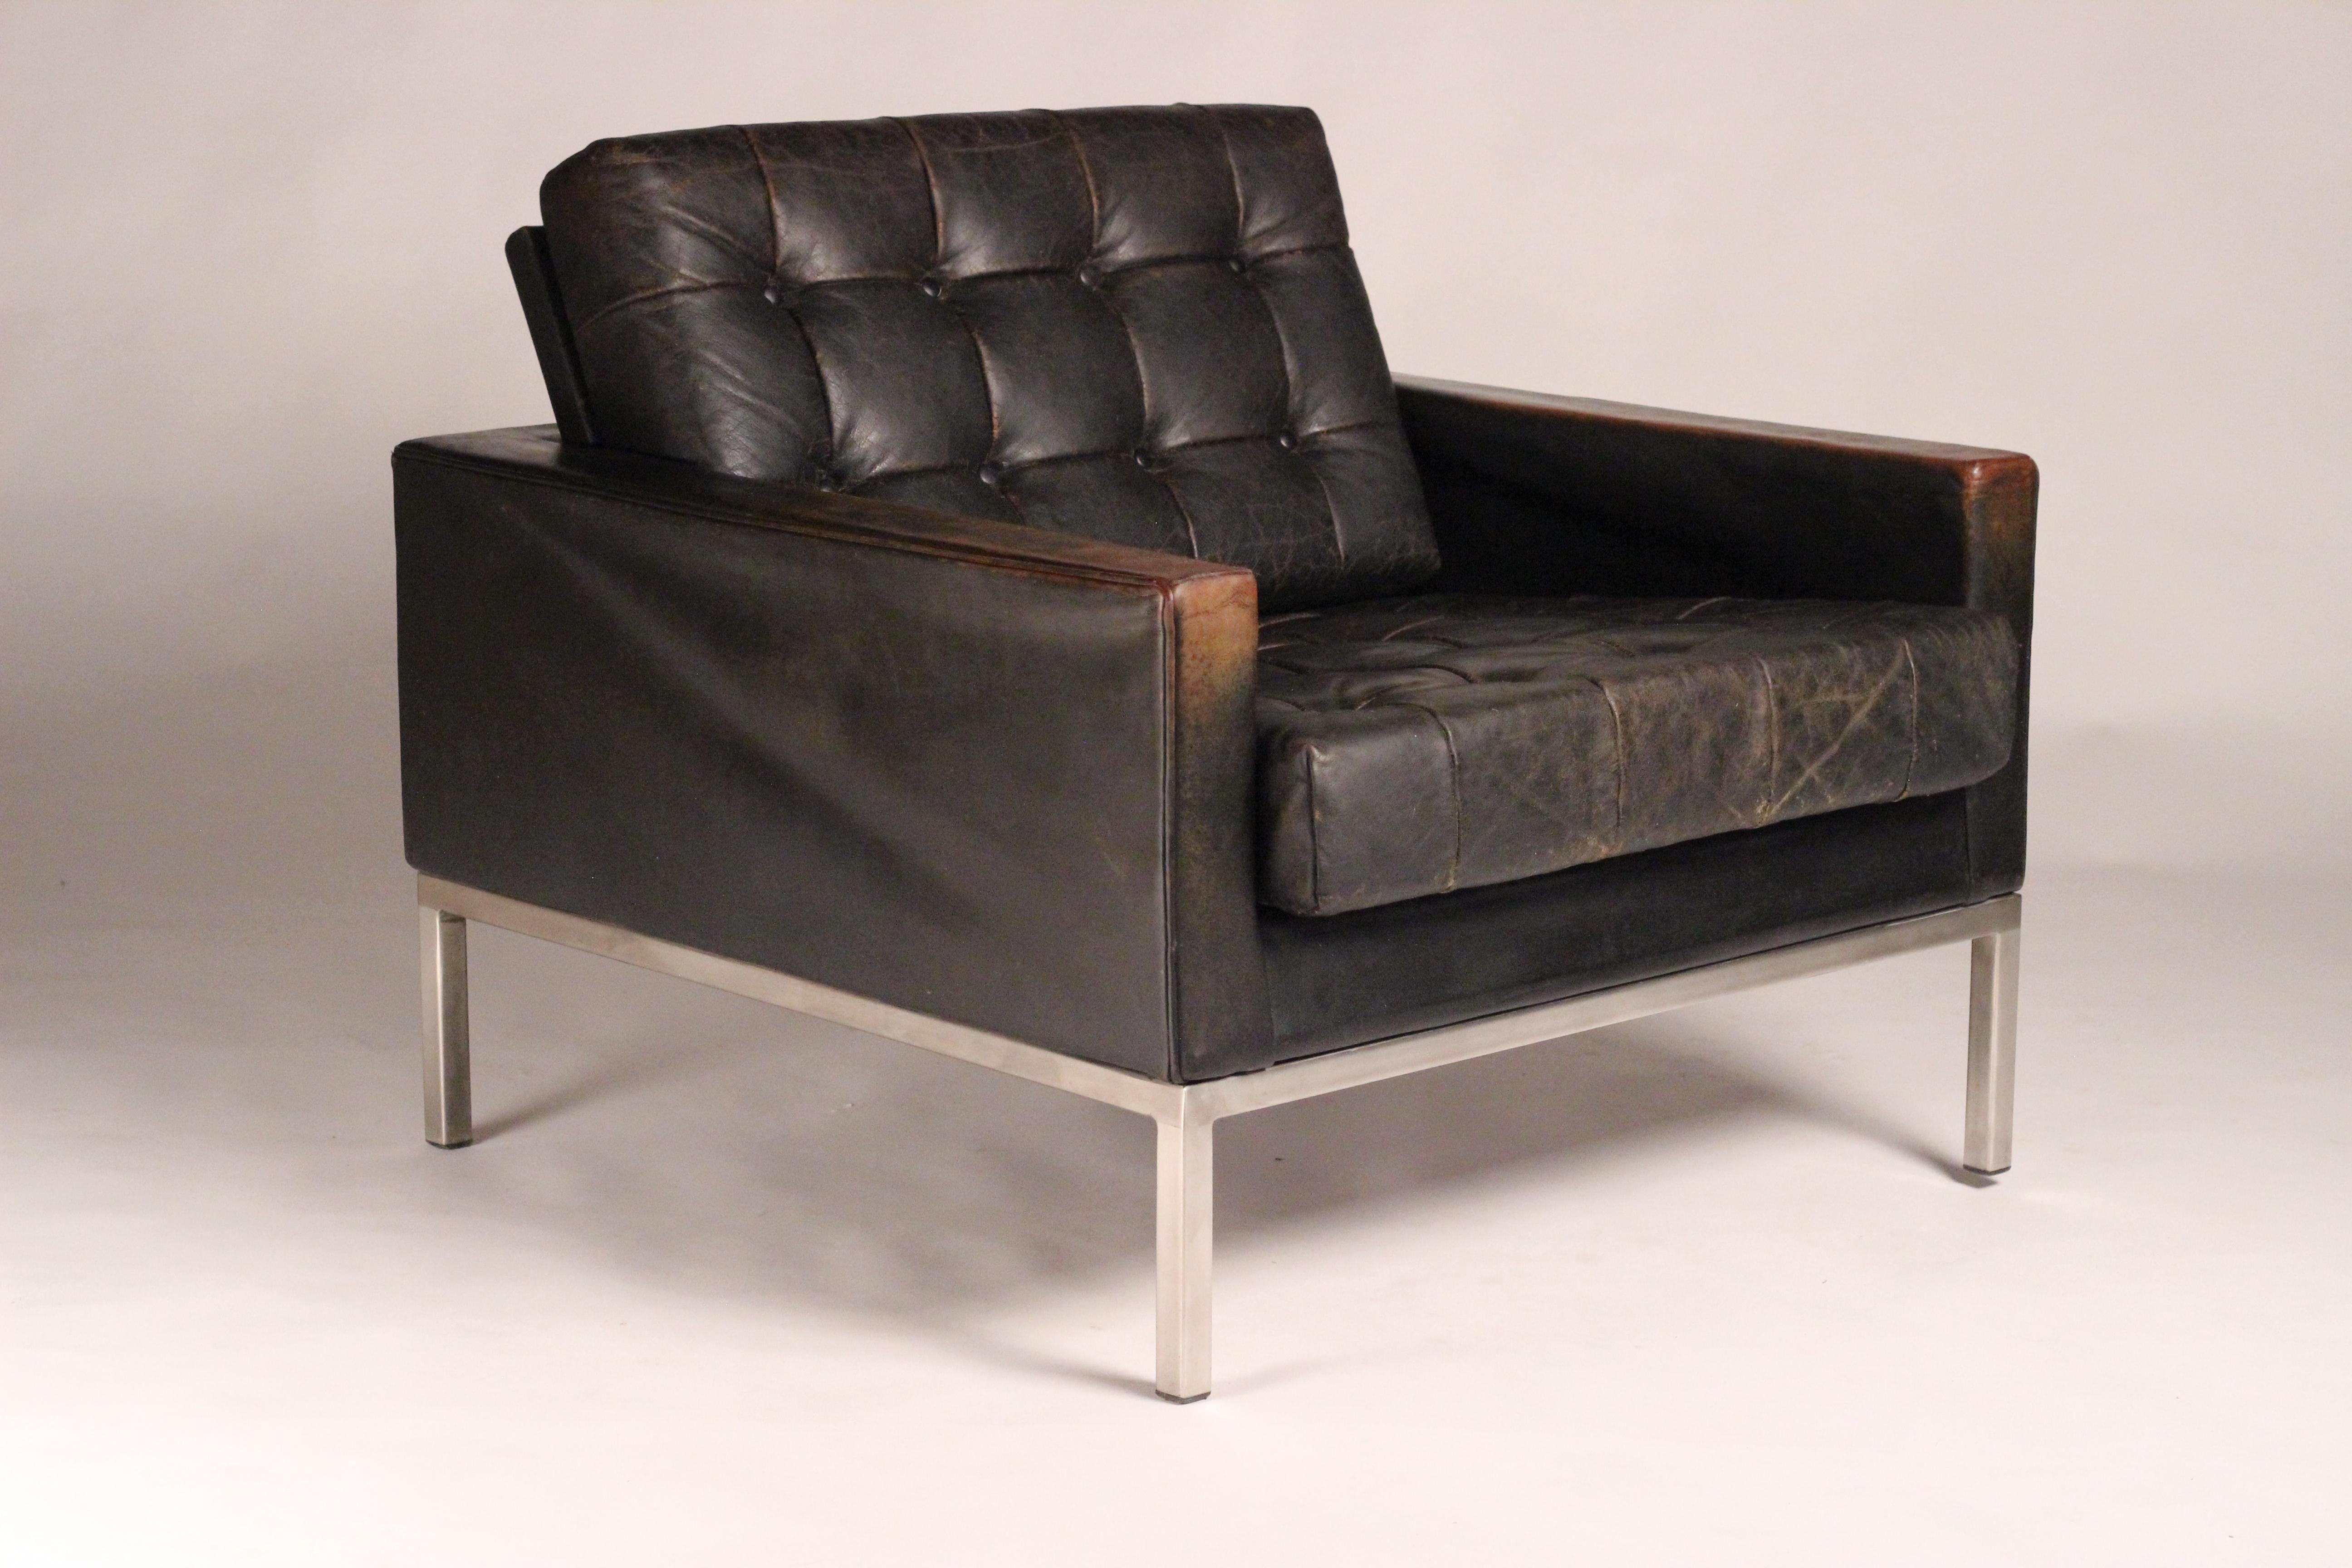 English Pair of Mid-Century Modern Club Leather Armchairs by Designer Robin Day